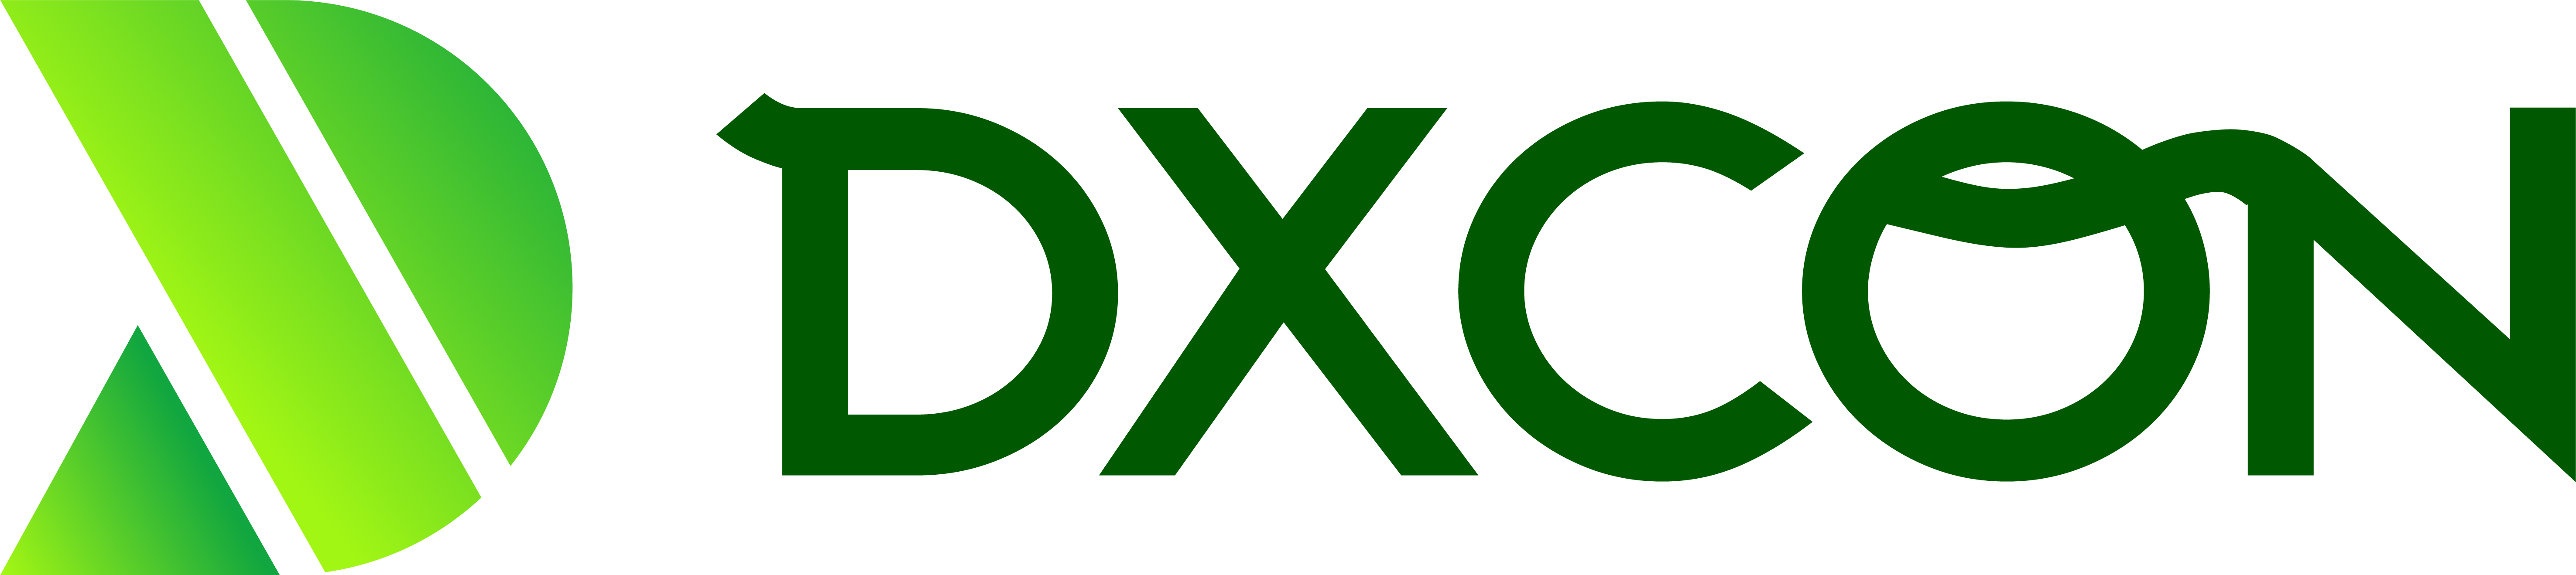 DX CON – Digital Solutions & Consulting for Experience Management Logo